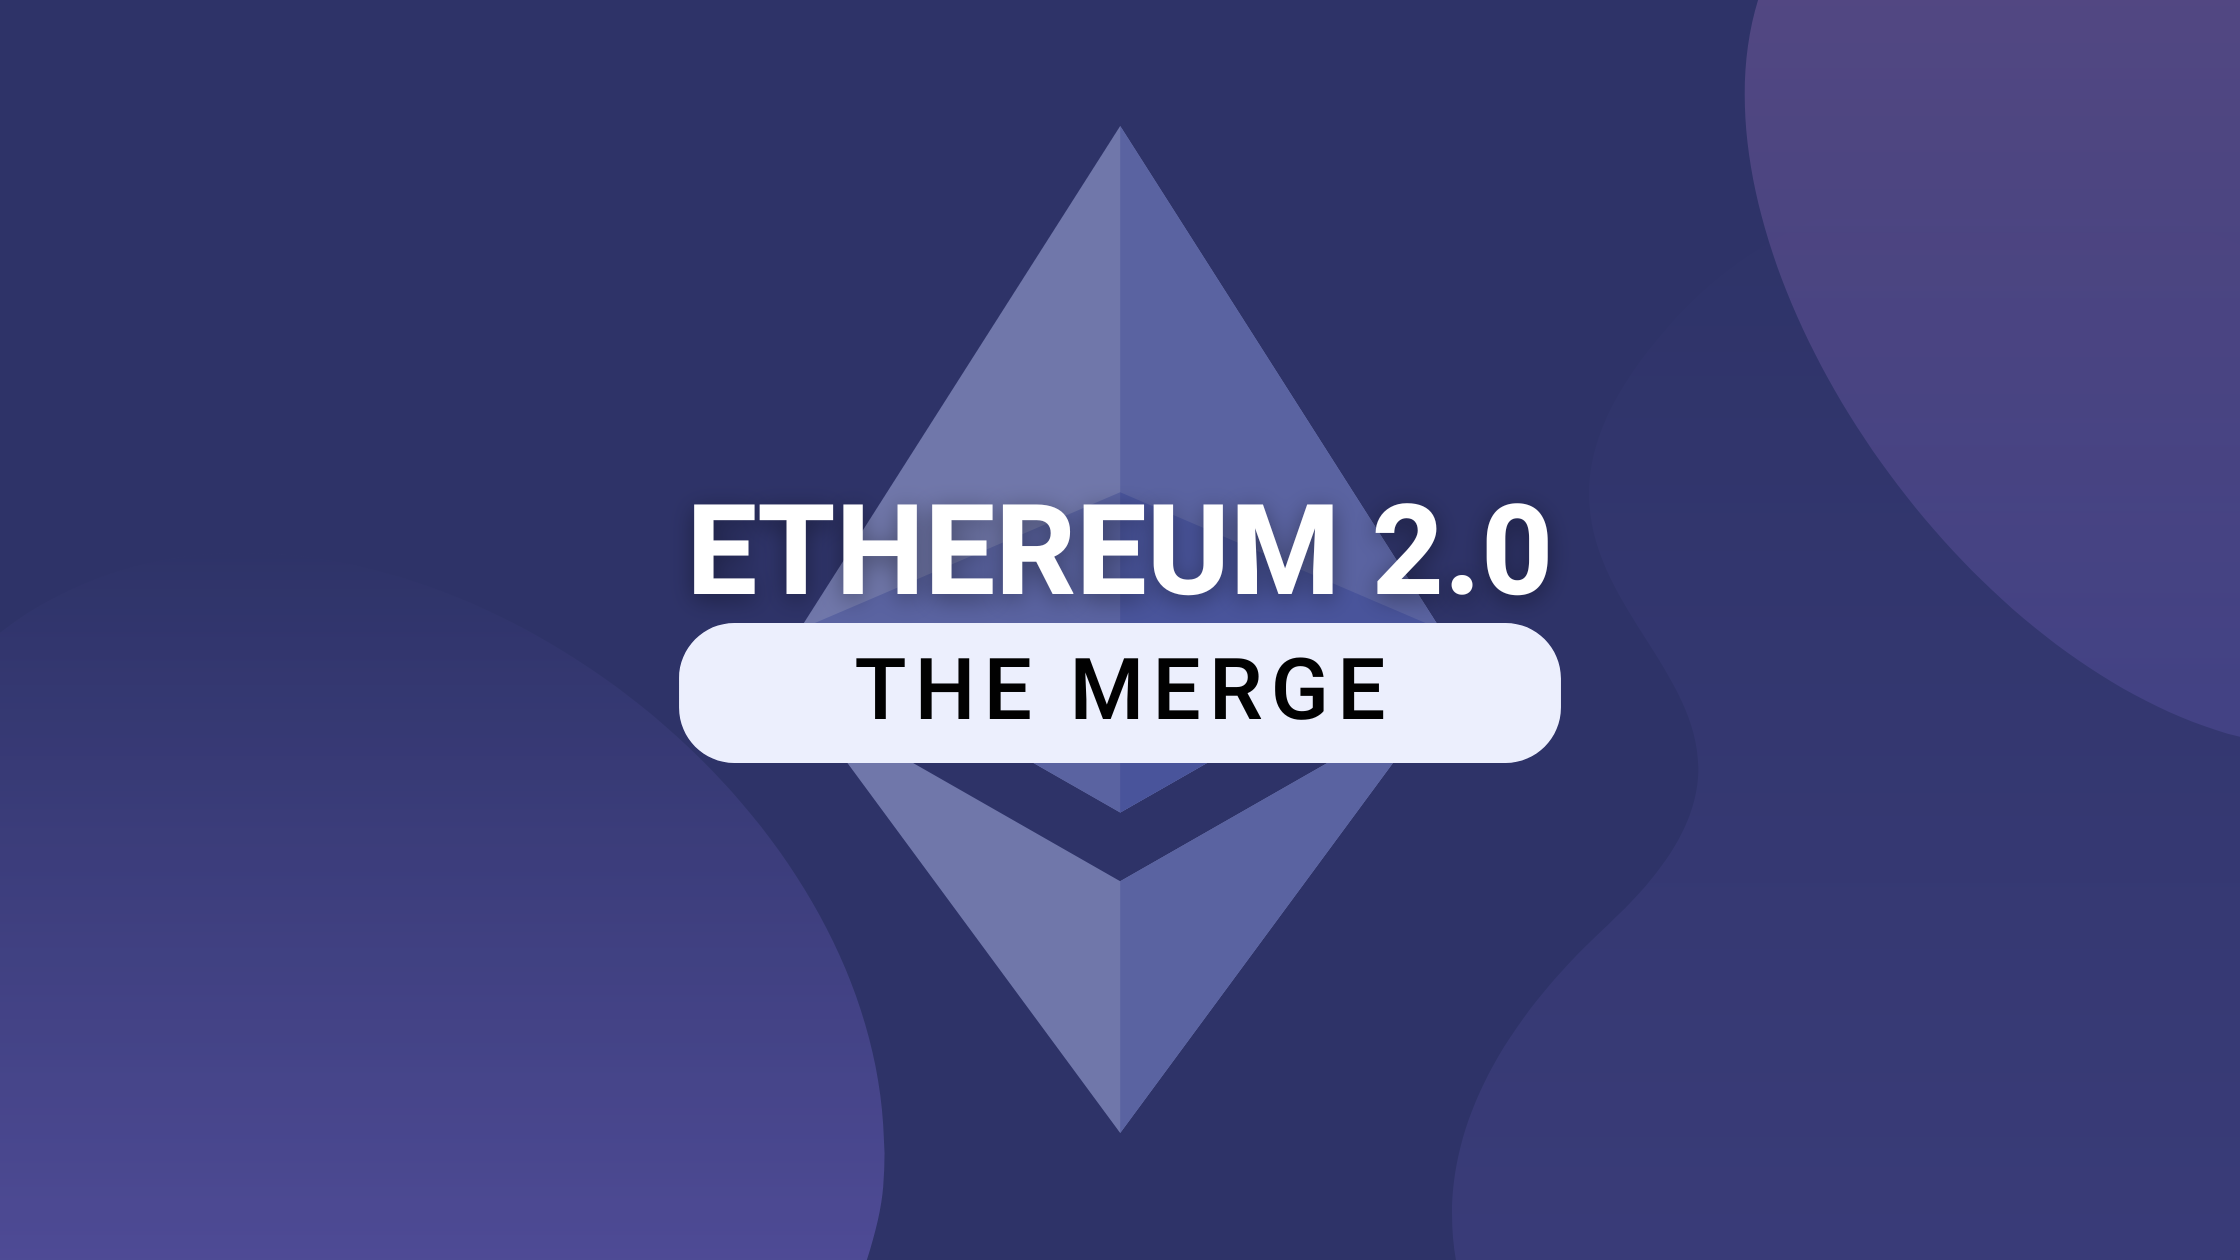 When is the ethereum merge